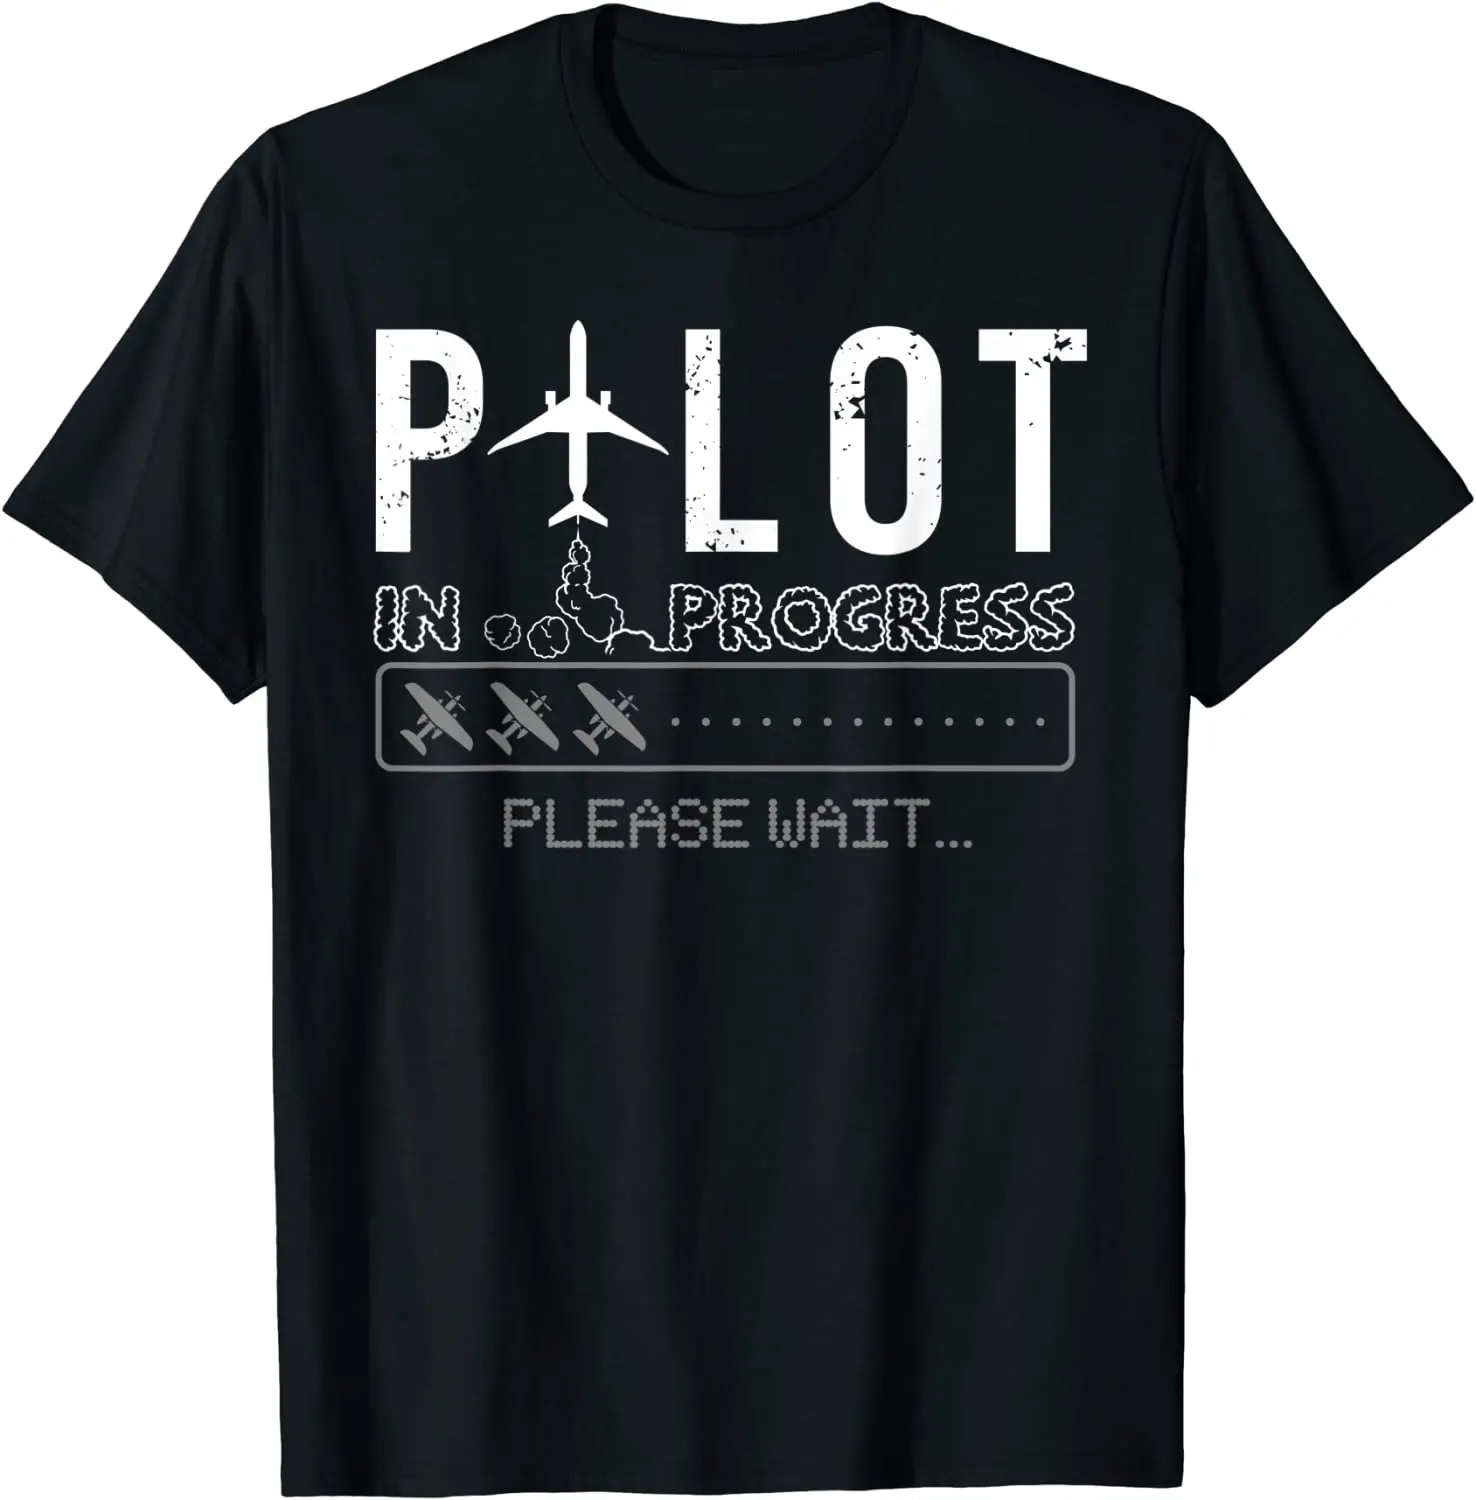 

Pilot In Progress. Funny Future Pilot Aviation Airplane Gift T Shirt. New 100% Cotton Short Sleeve O-Neck Casual Mens T-shirts